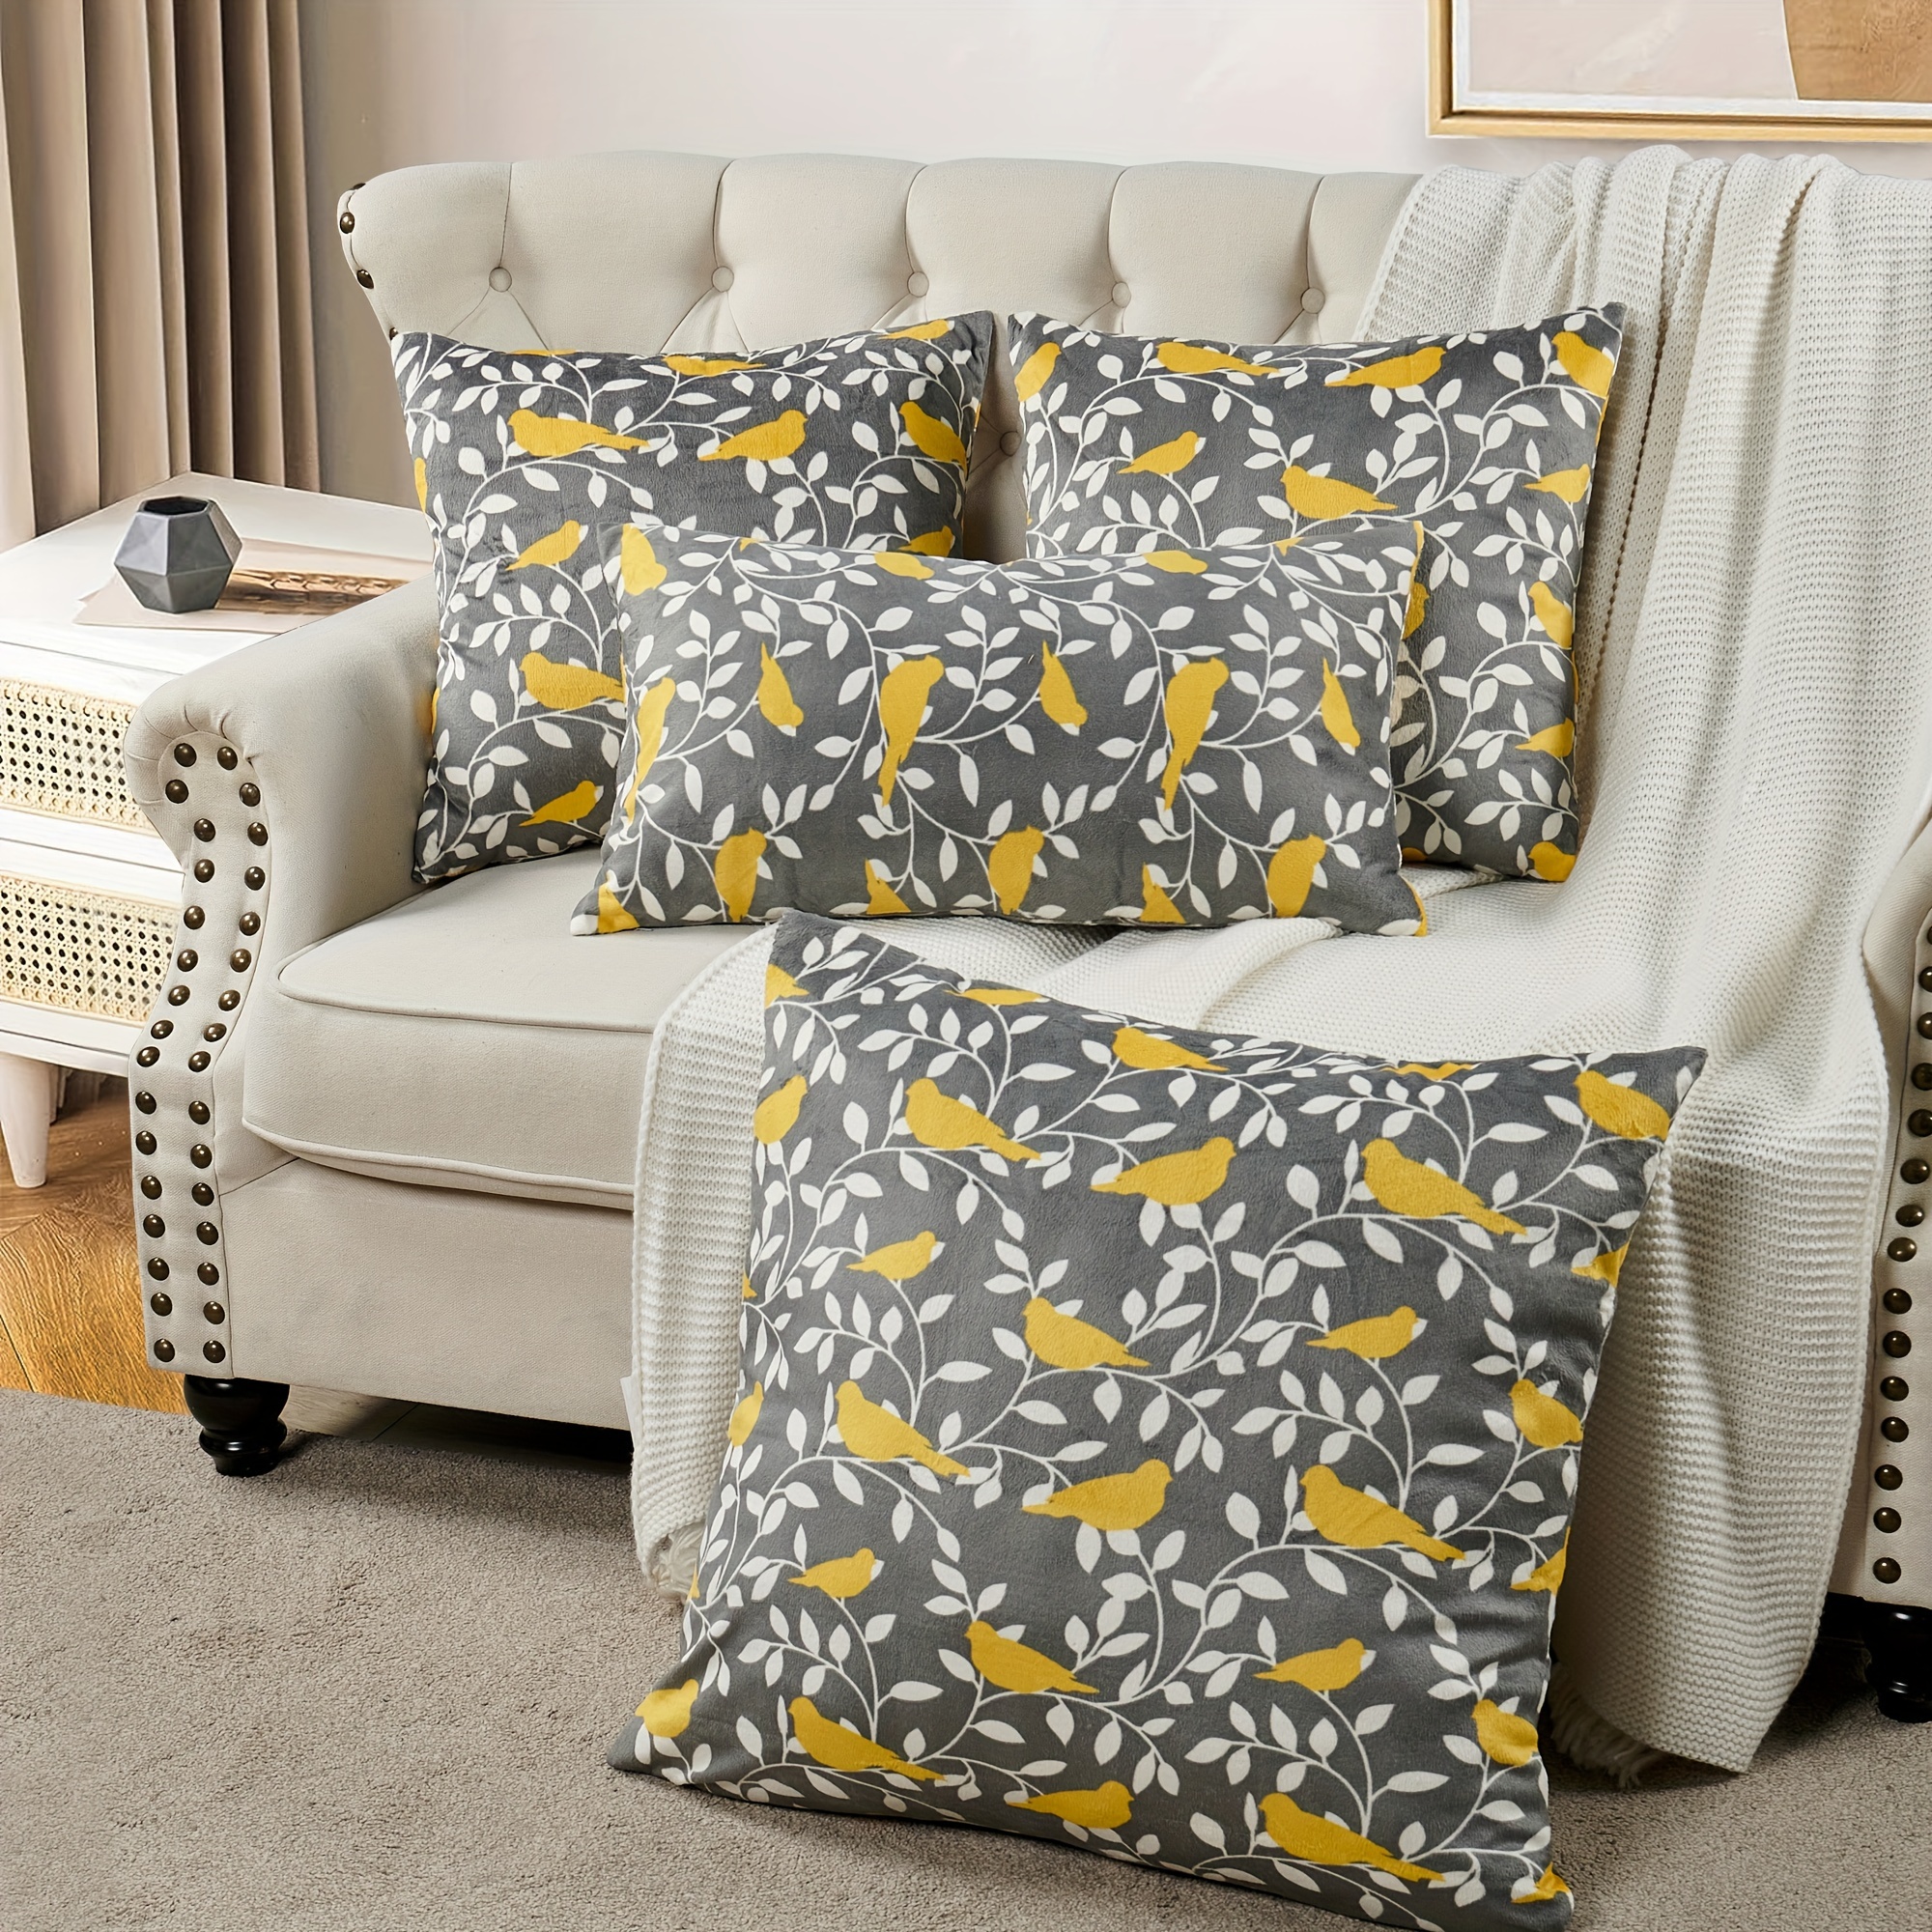 

2pcs Canary Printed Microplush Soft Decorative Throw Pillow Covers Set With Double Sided (no Insert), Stylish Cushion Cover For Sofa Couch Chair Living Room Bedroom Decor